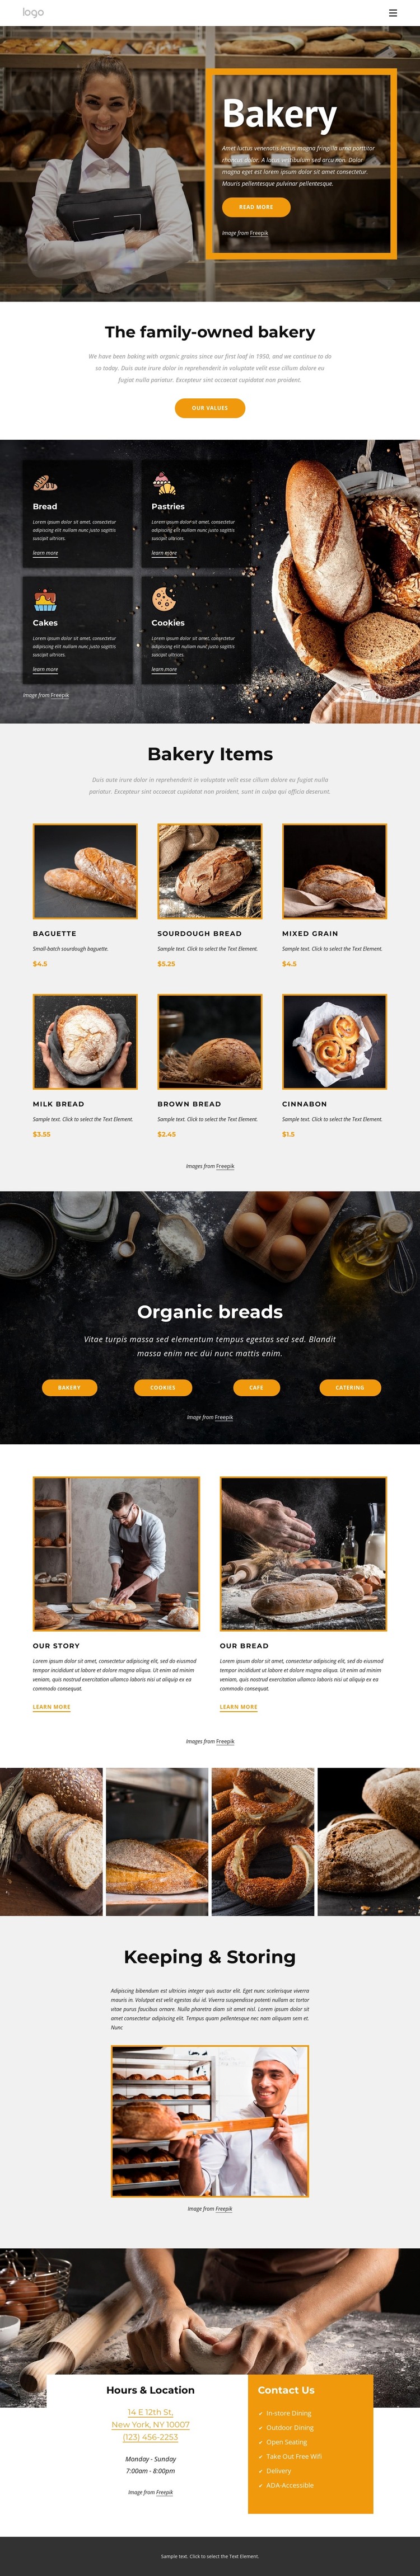 The family-owned bakery Web Design